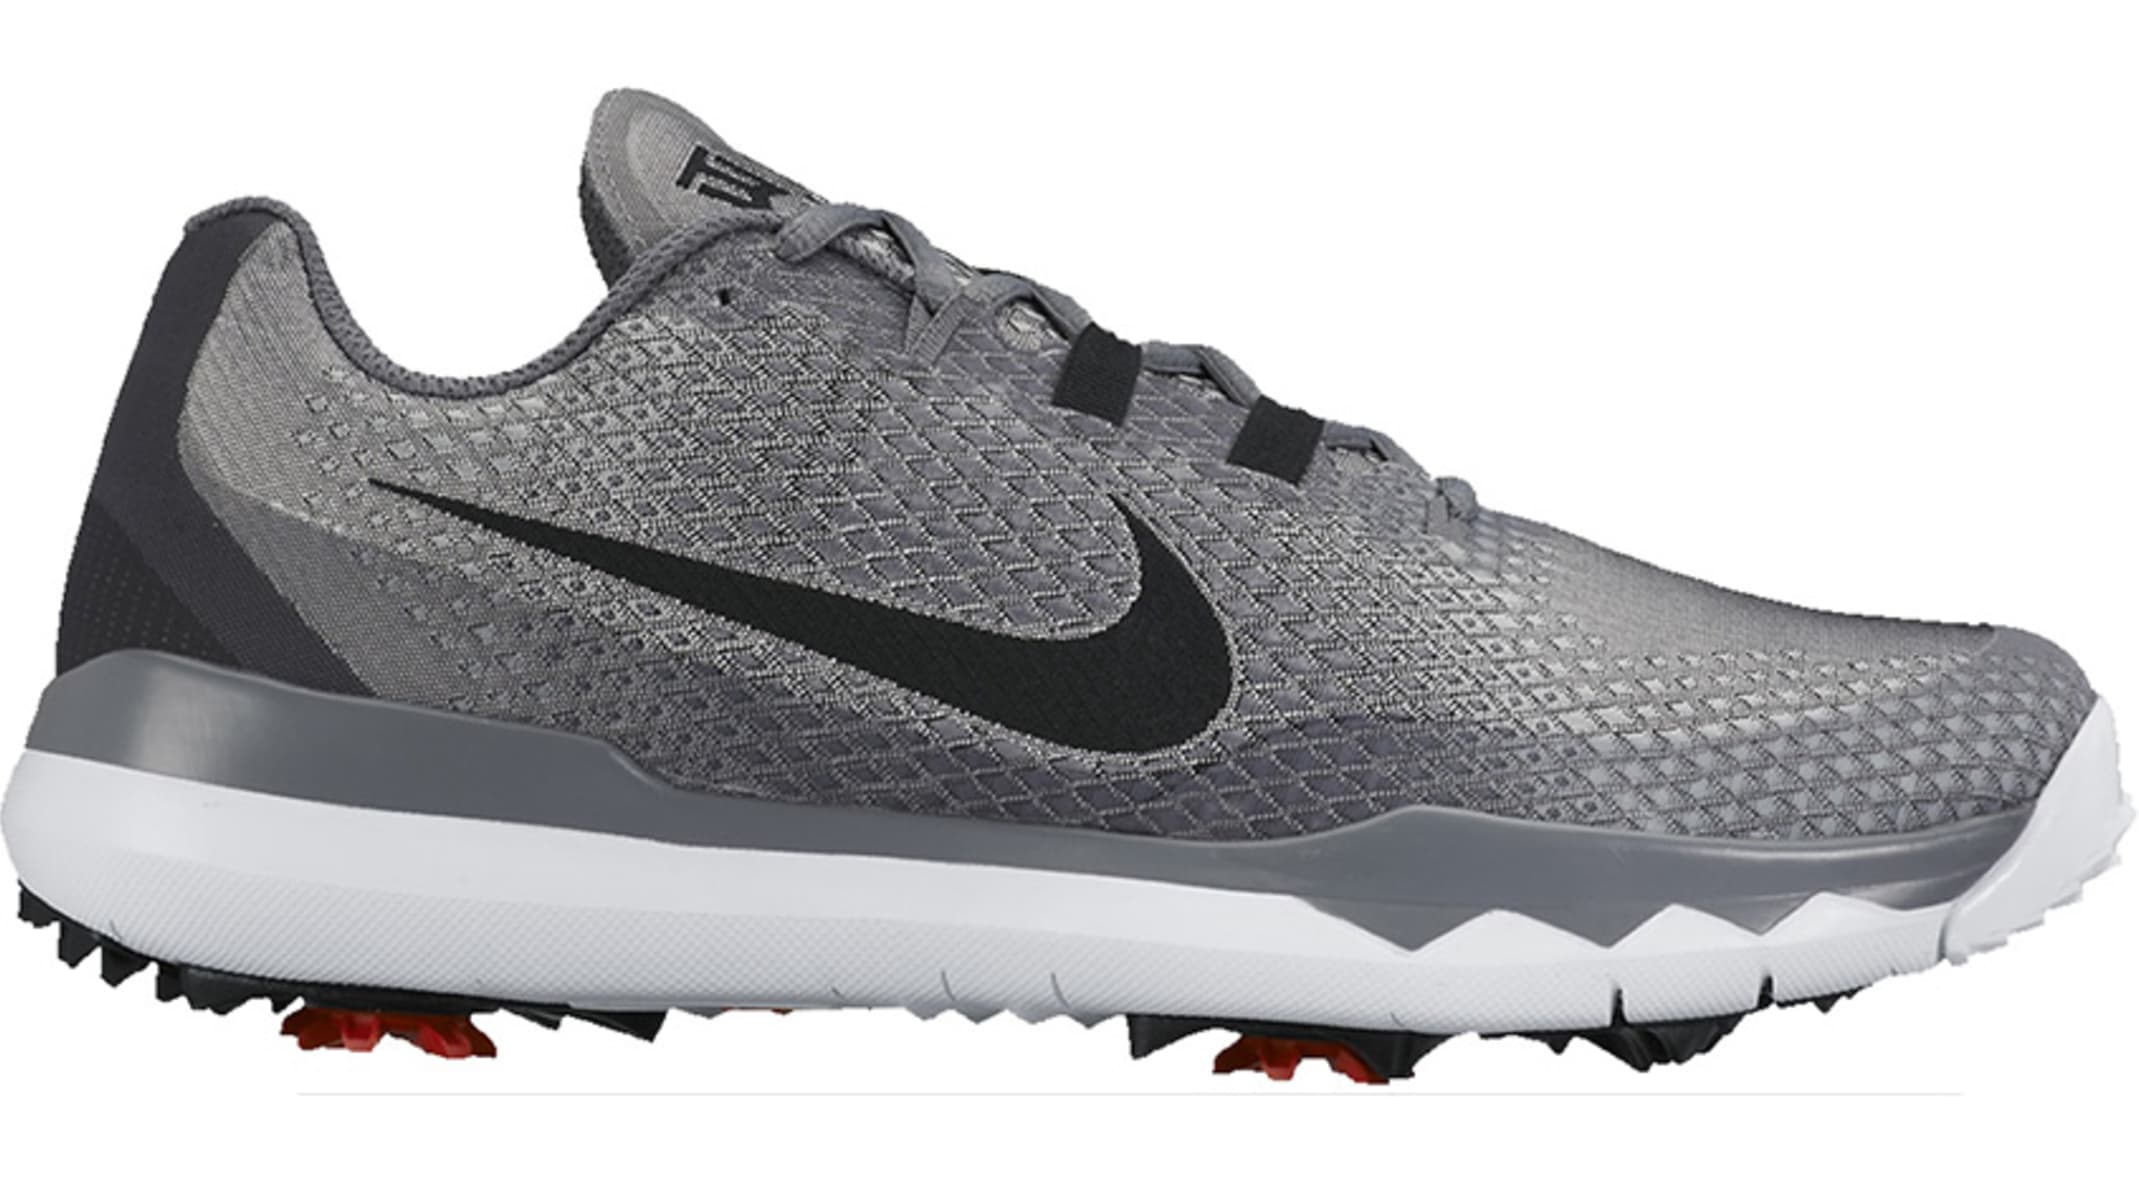 2019 tiger woods golf shoes